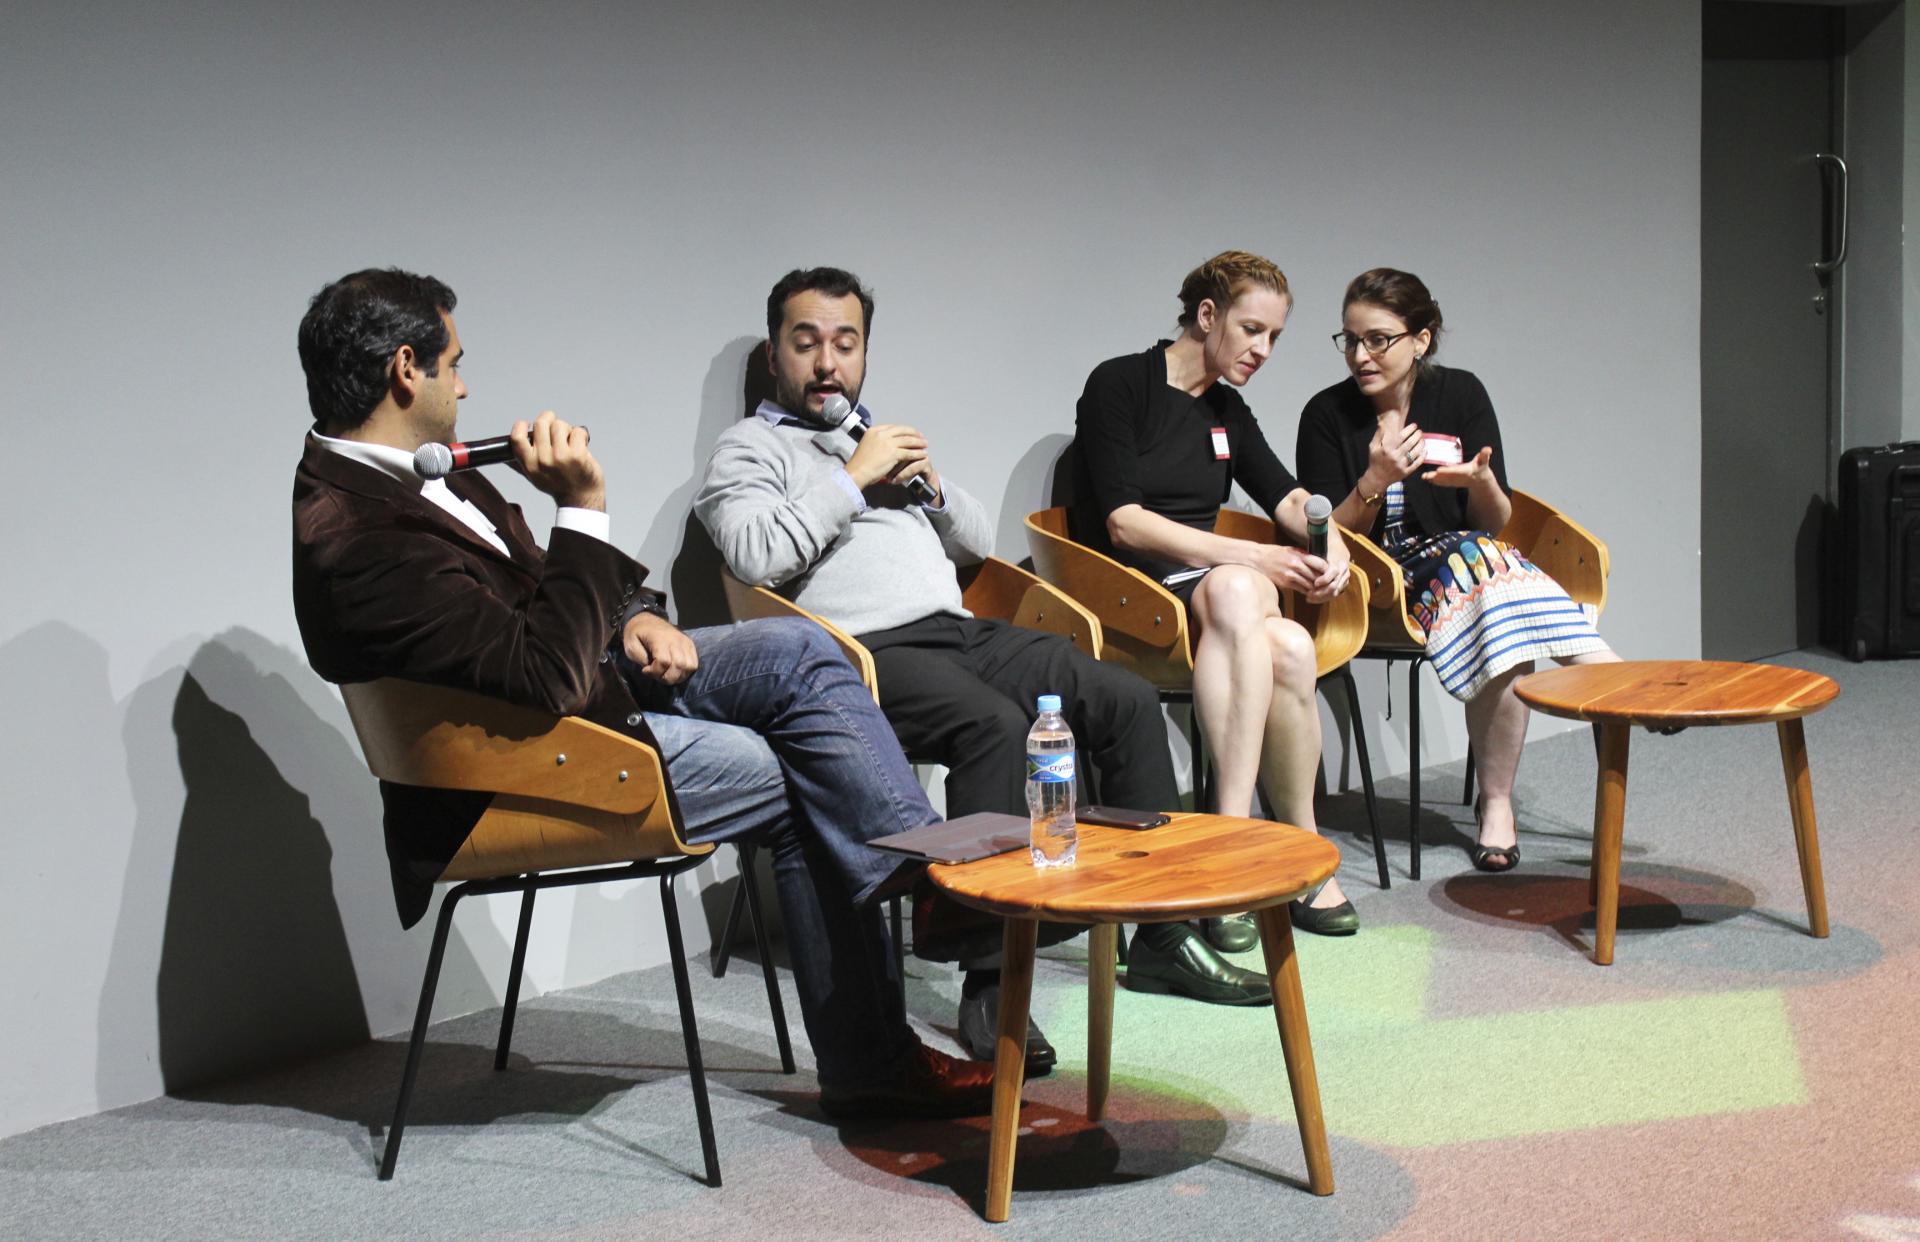 Q&A session with Professor Alexis Wichowski and Guilherme Almeida during the Hacking the Bureaucracy event